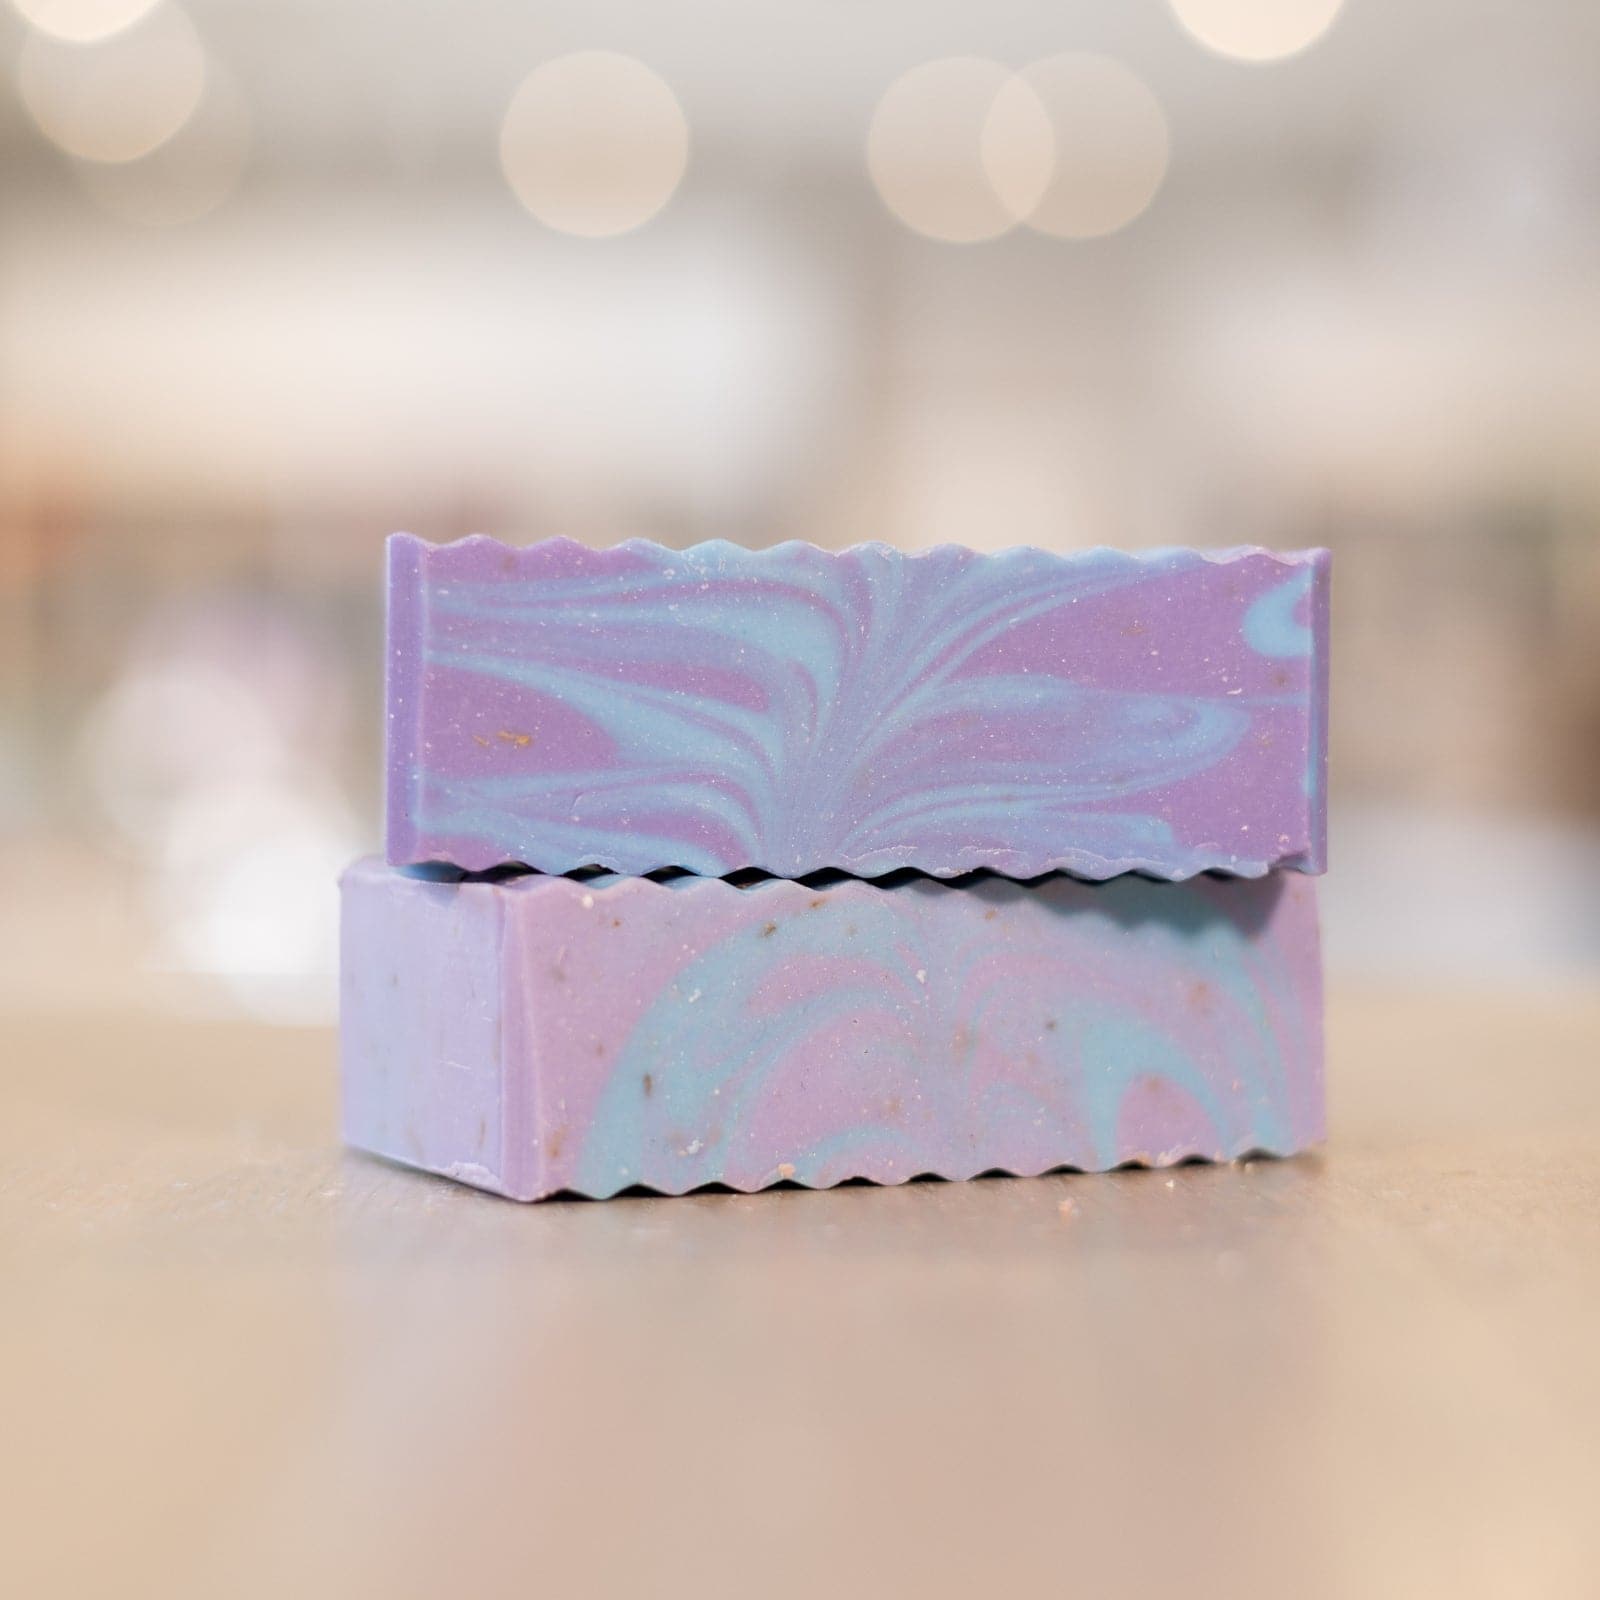 Two bars of Buff City Soap's lavender colored with blue and purple swirls stacked a top each other